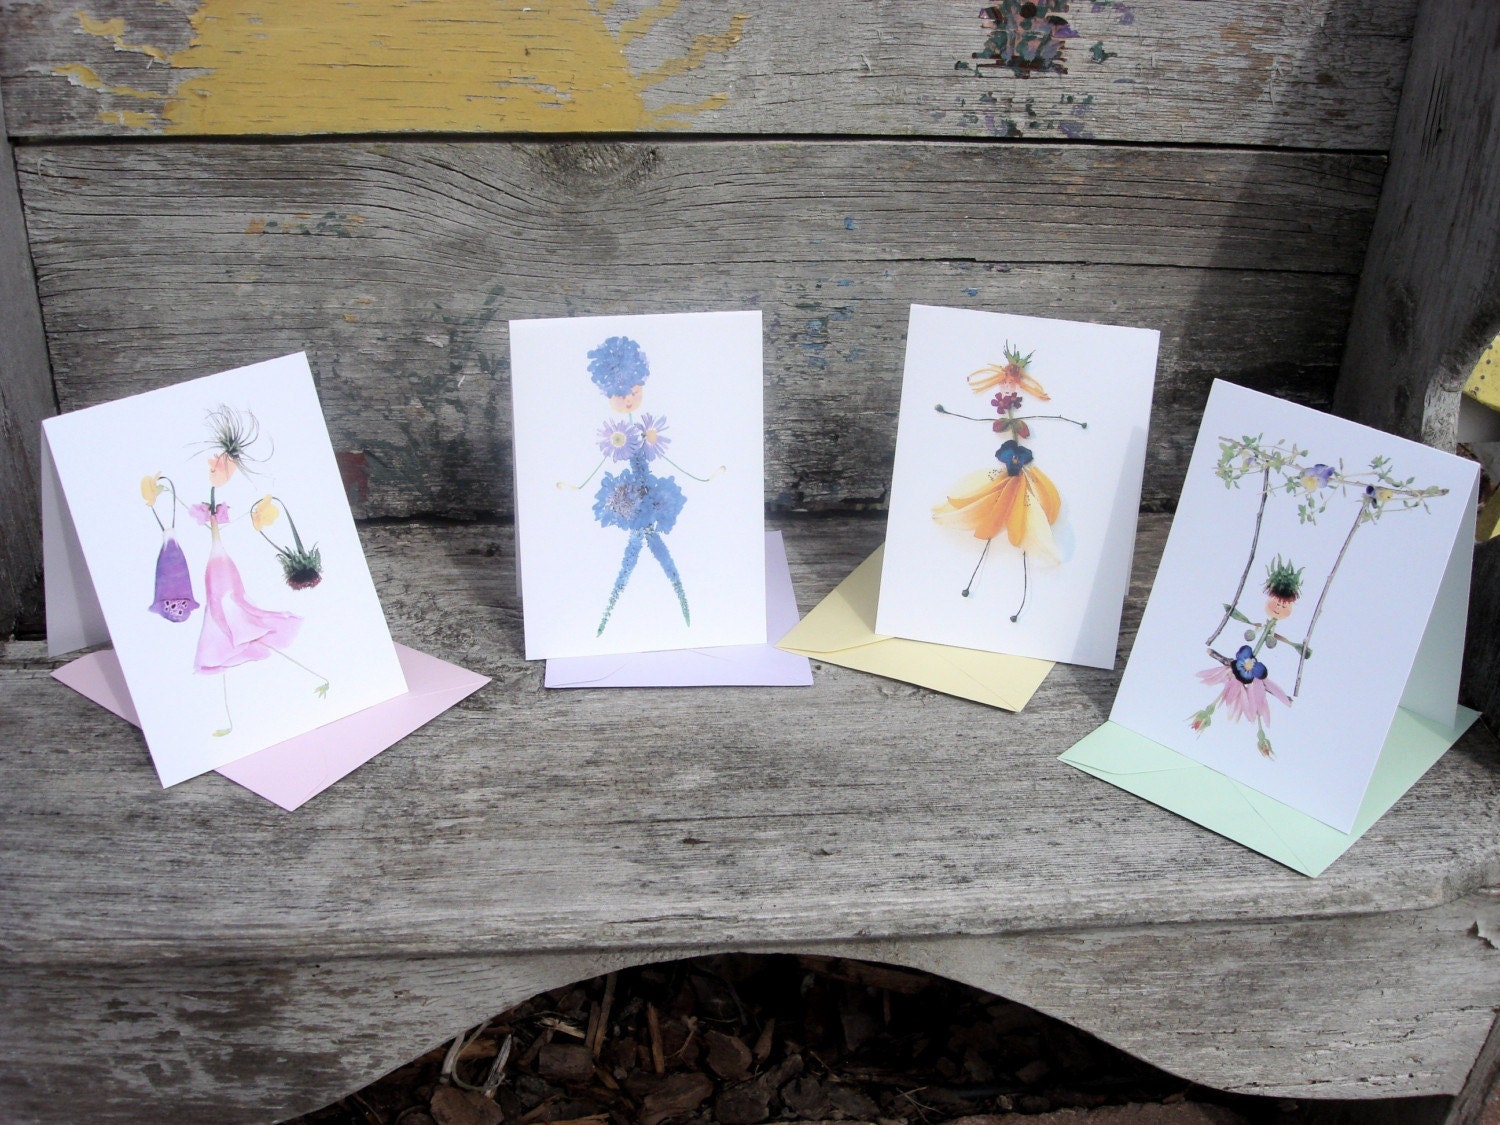 Set of 6 Blank Greeting Cards with Original Flower Girl Art